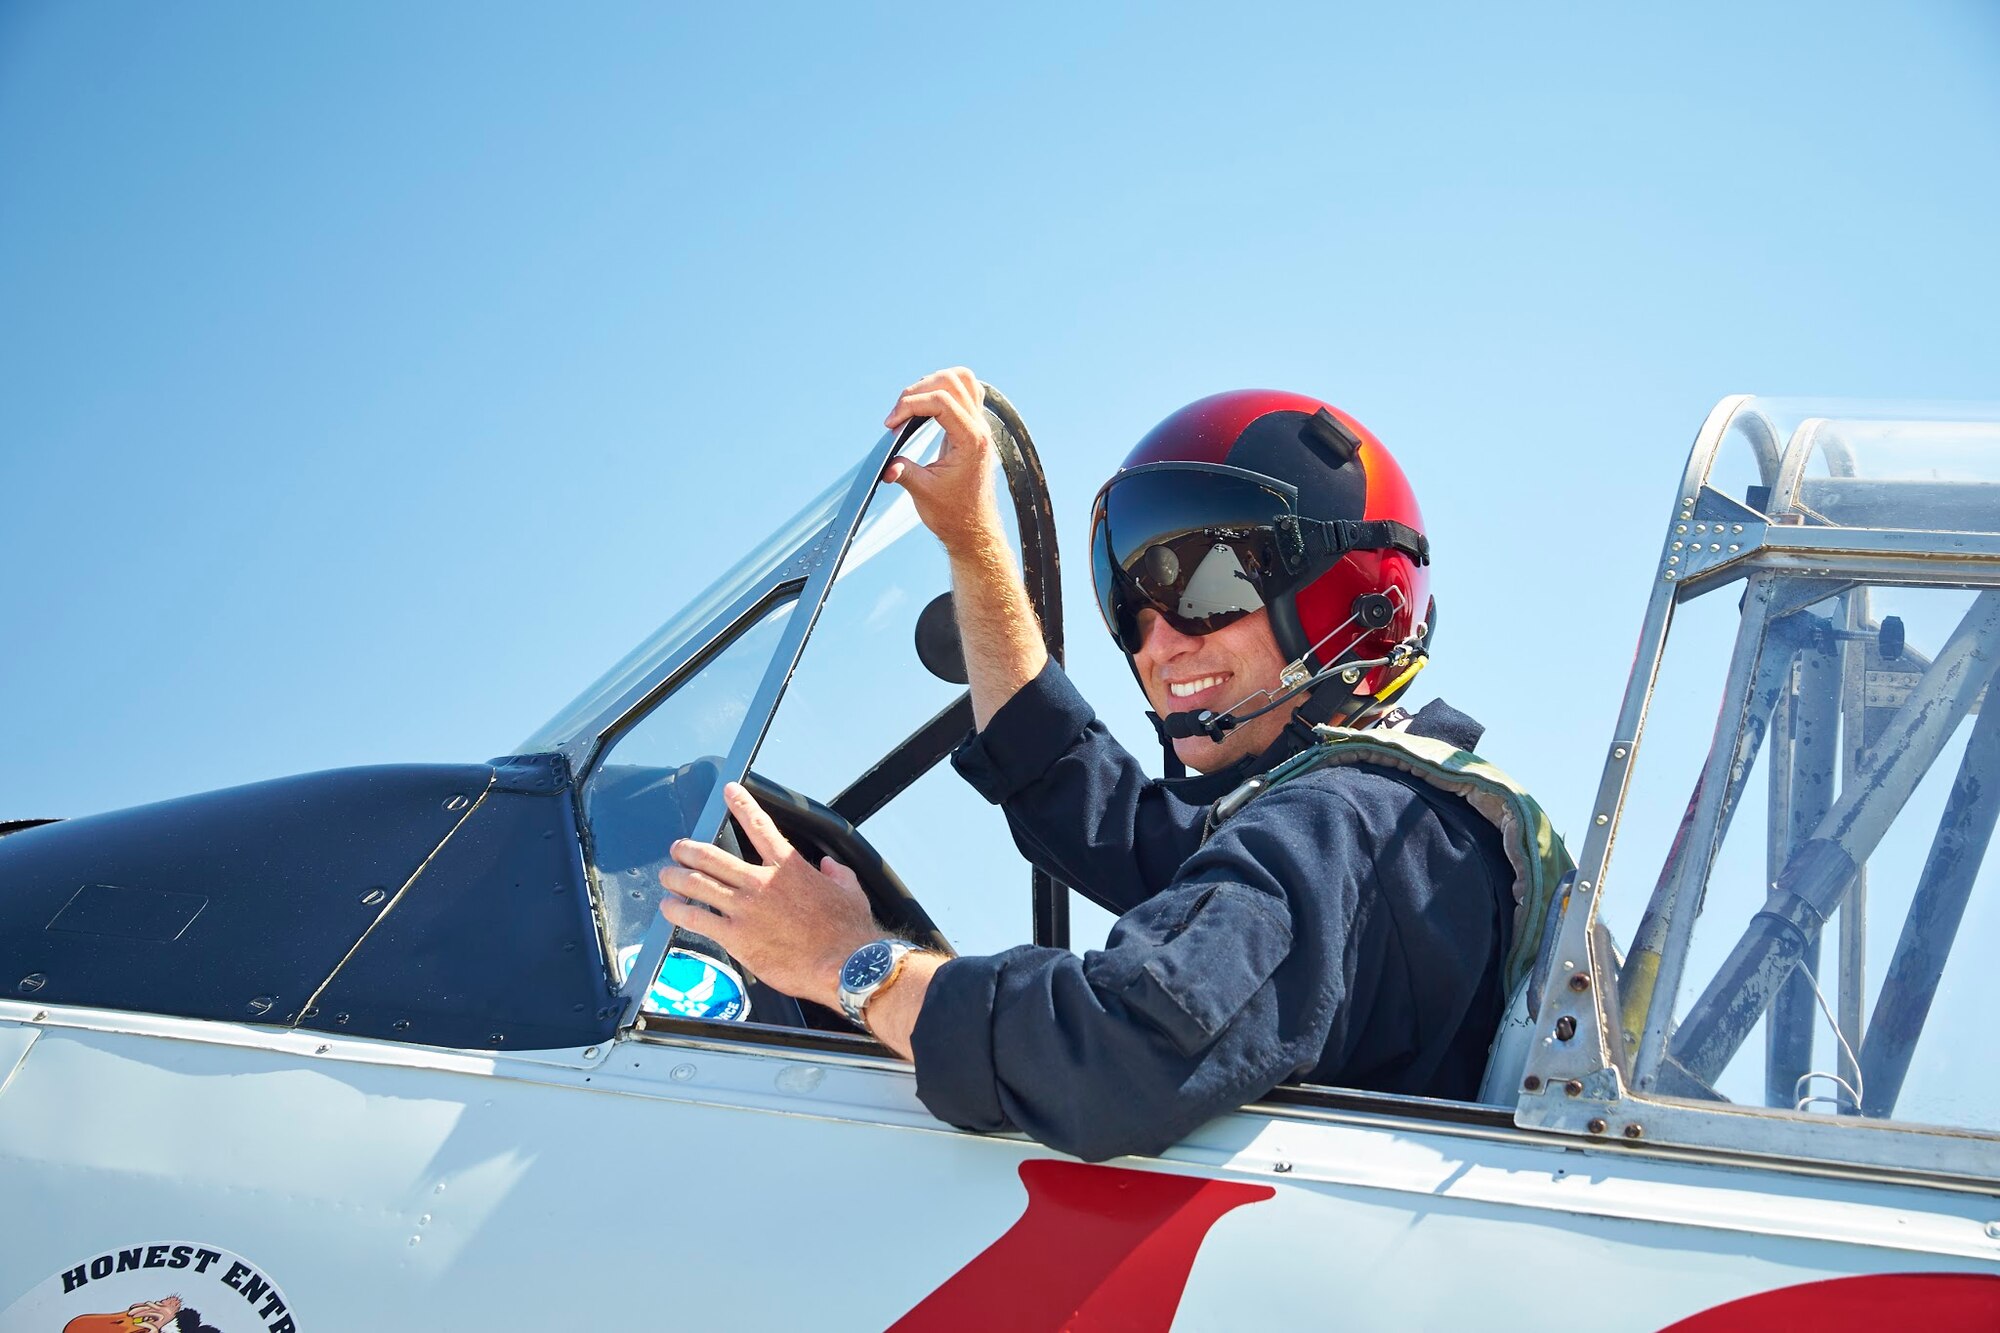 Lt. Col. Kevin Sutterfield lands his T-6 after an exciting final race at the 51st Annual National Championship Air Races Sept. 14. (Courtesy Photo)